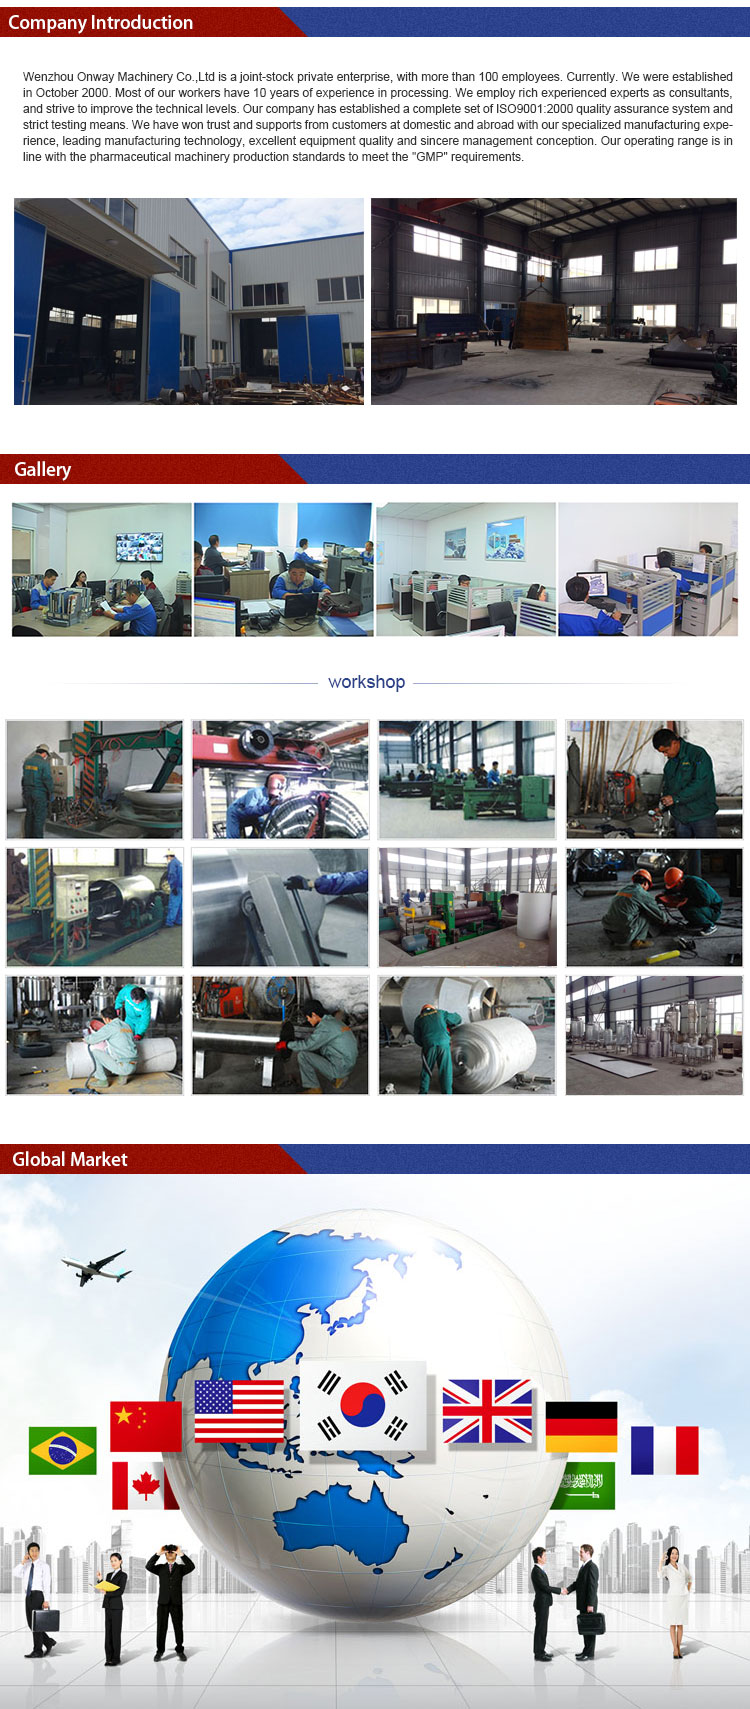 Pl Stainless Steel Steam Cooling Water Electirc Jacket Paint Powder Perfume Mixing Machine.